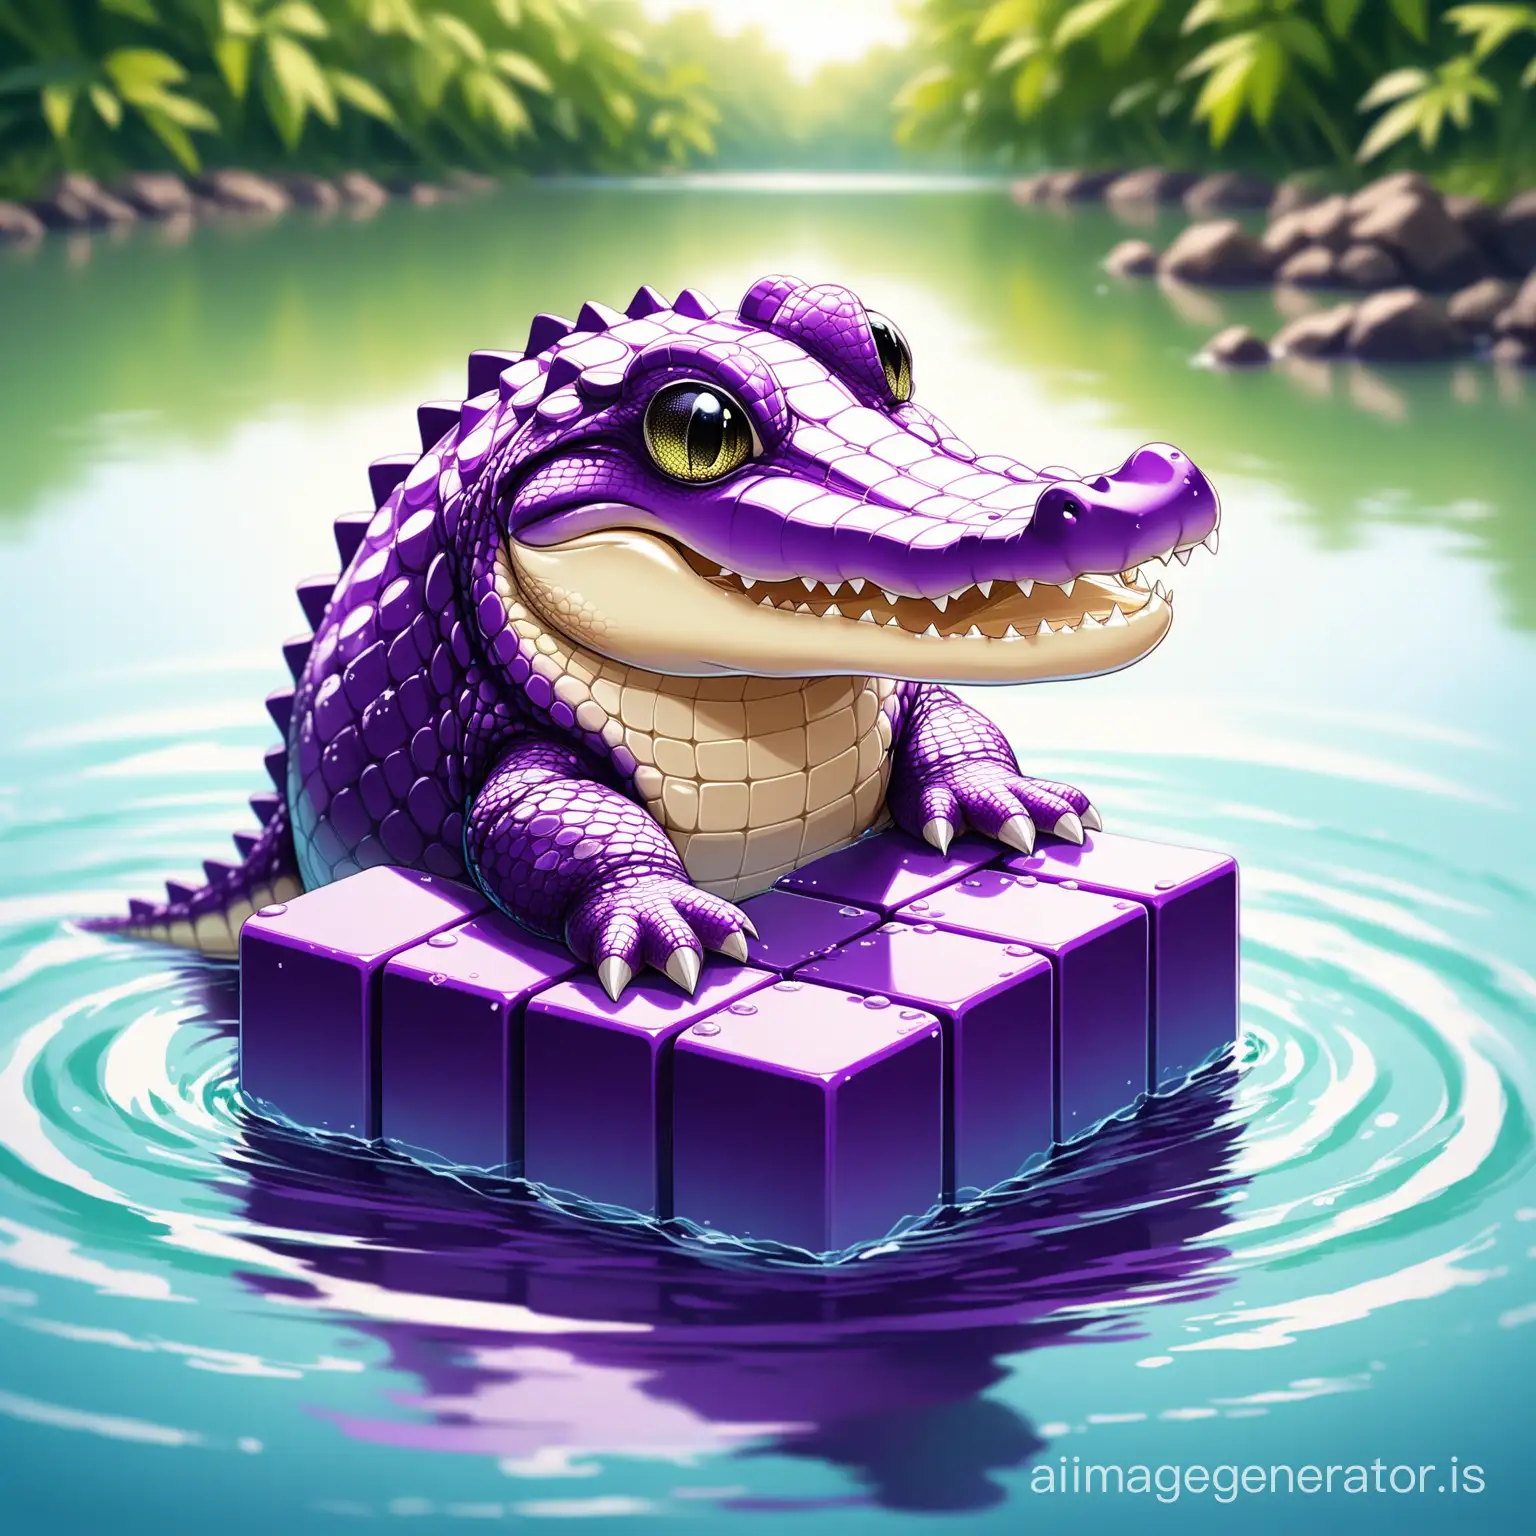 Adorable-Baby-Crocodile-Playing-with-Purple-Blocks-in-a-Serene-River-Scene